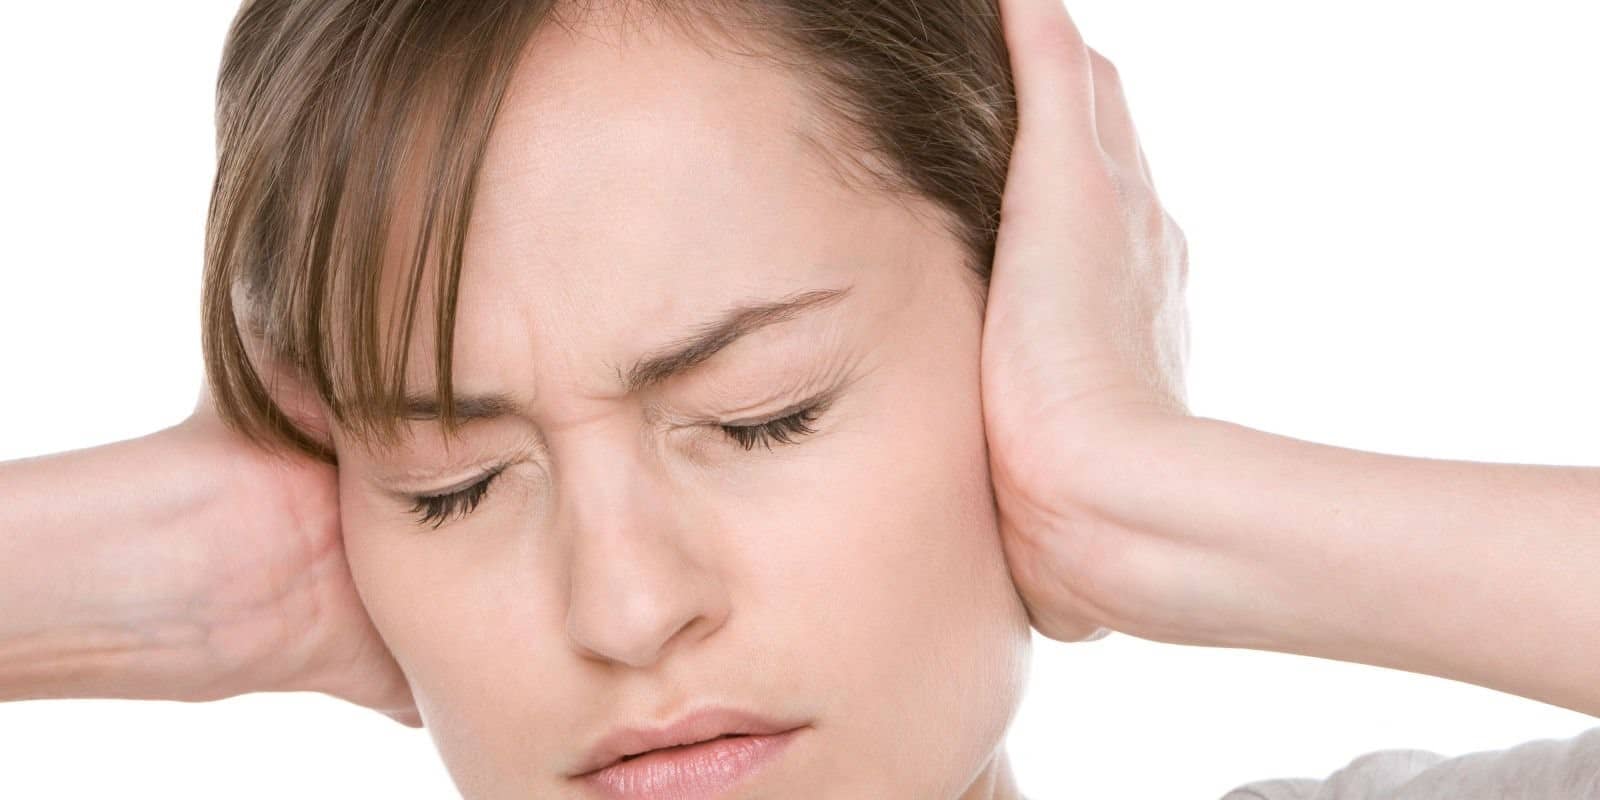 How to Mitigate Tinnitus Symptoms with Root-Cause Approaches